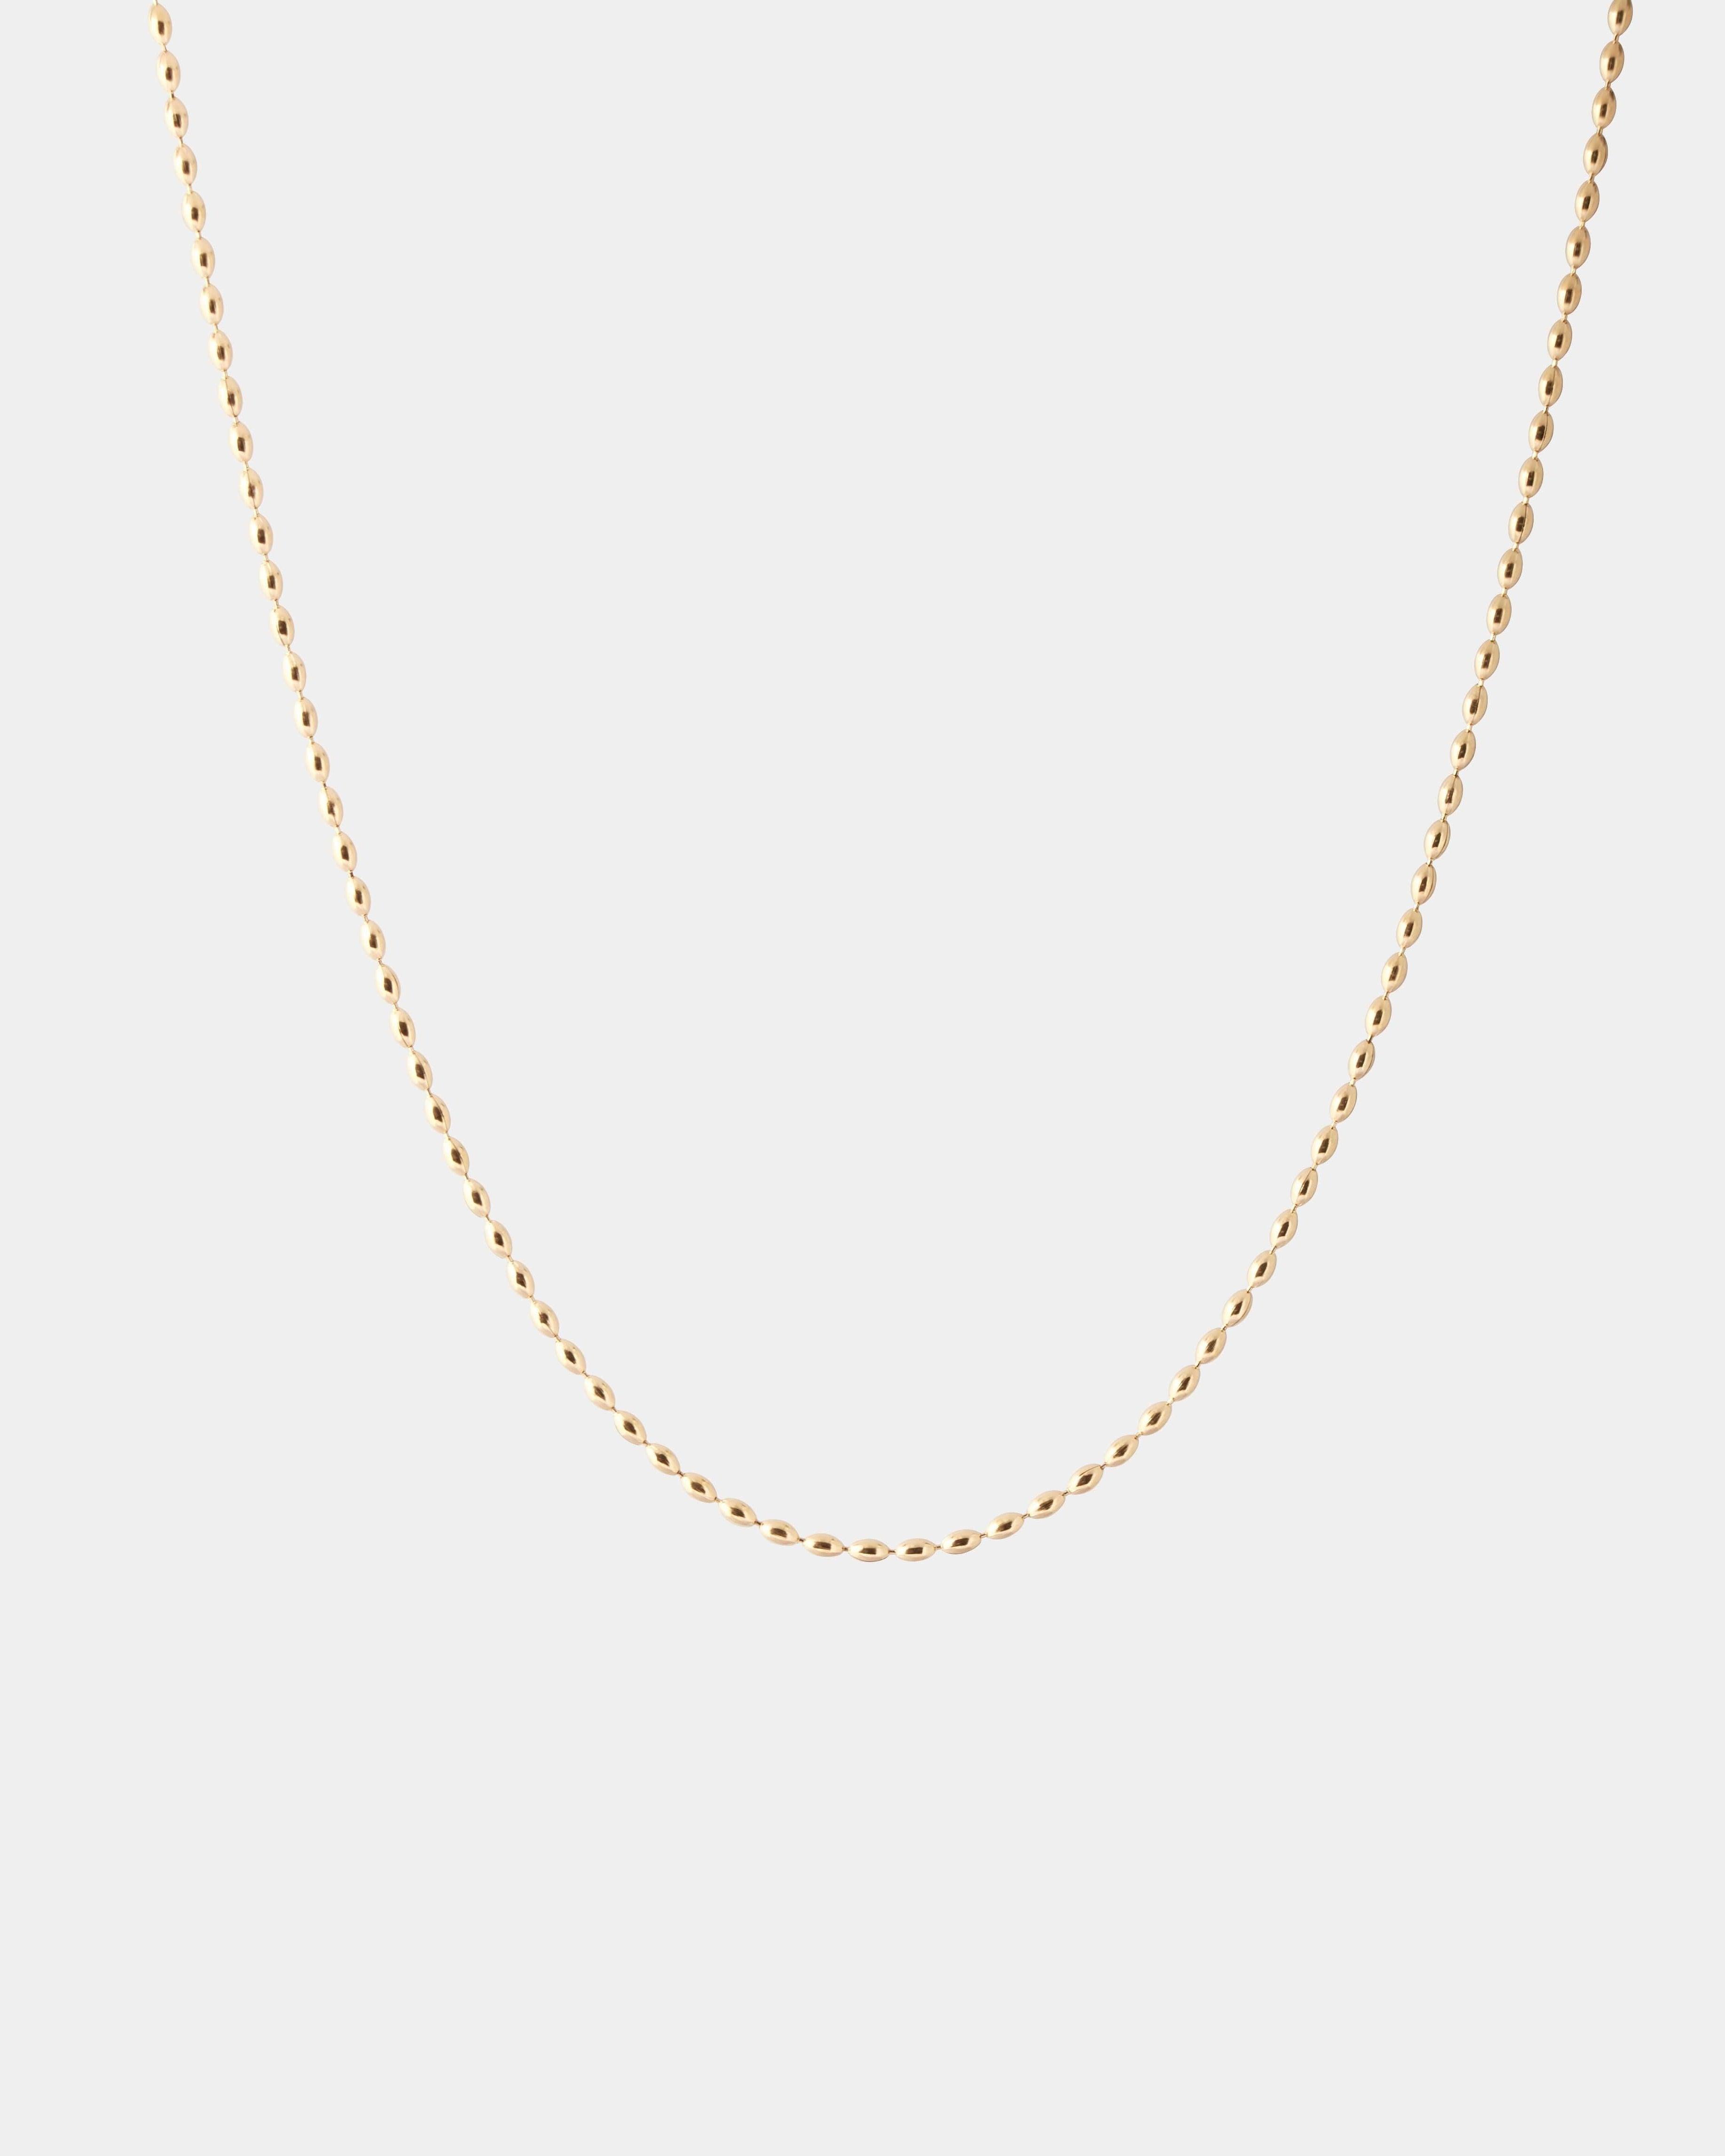 BALL CHAIN NECKLACE - LIMELY